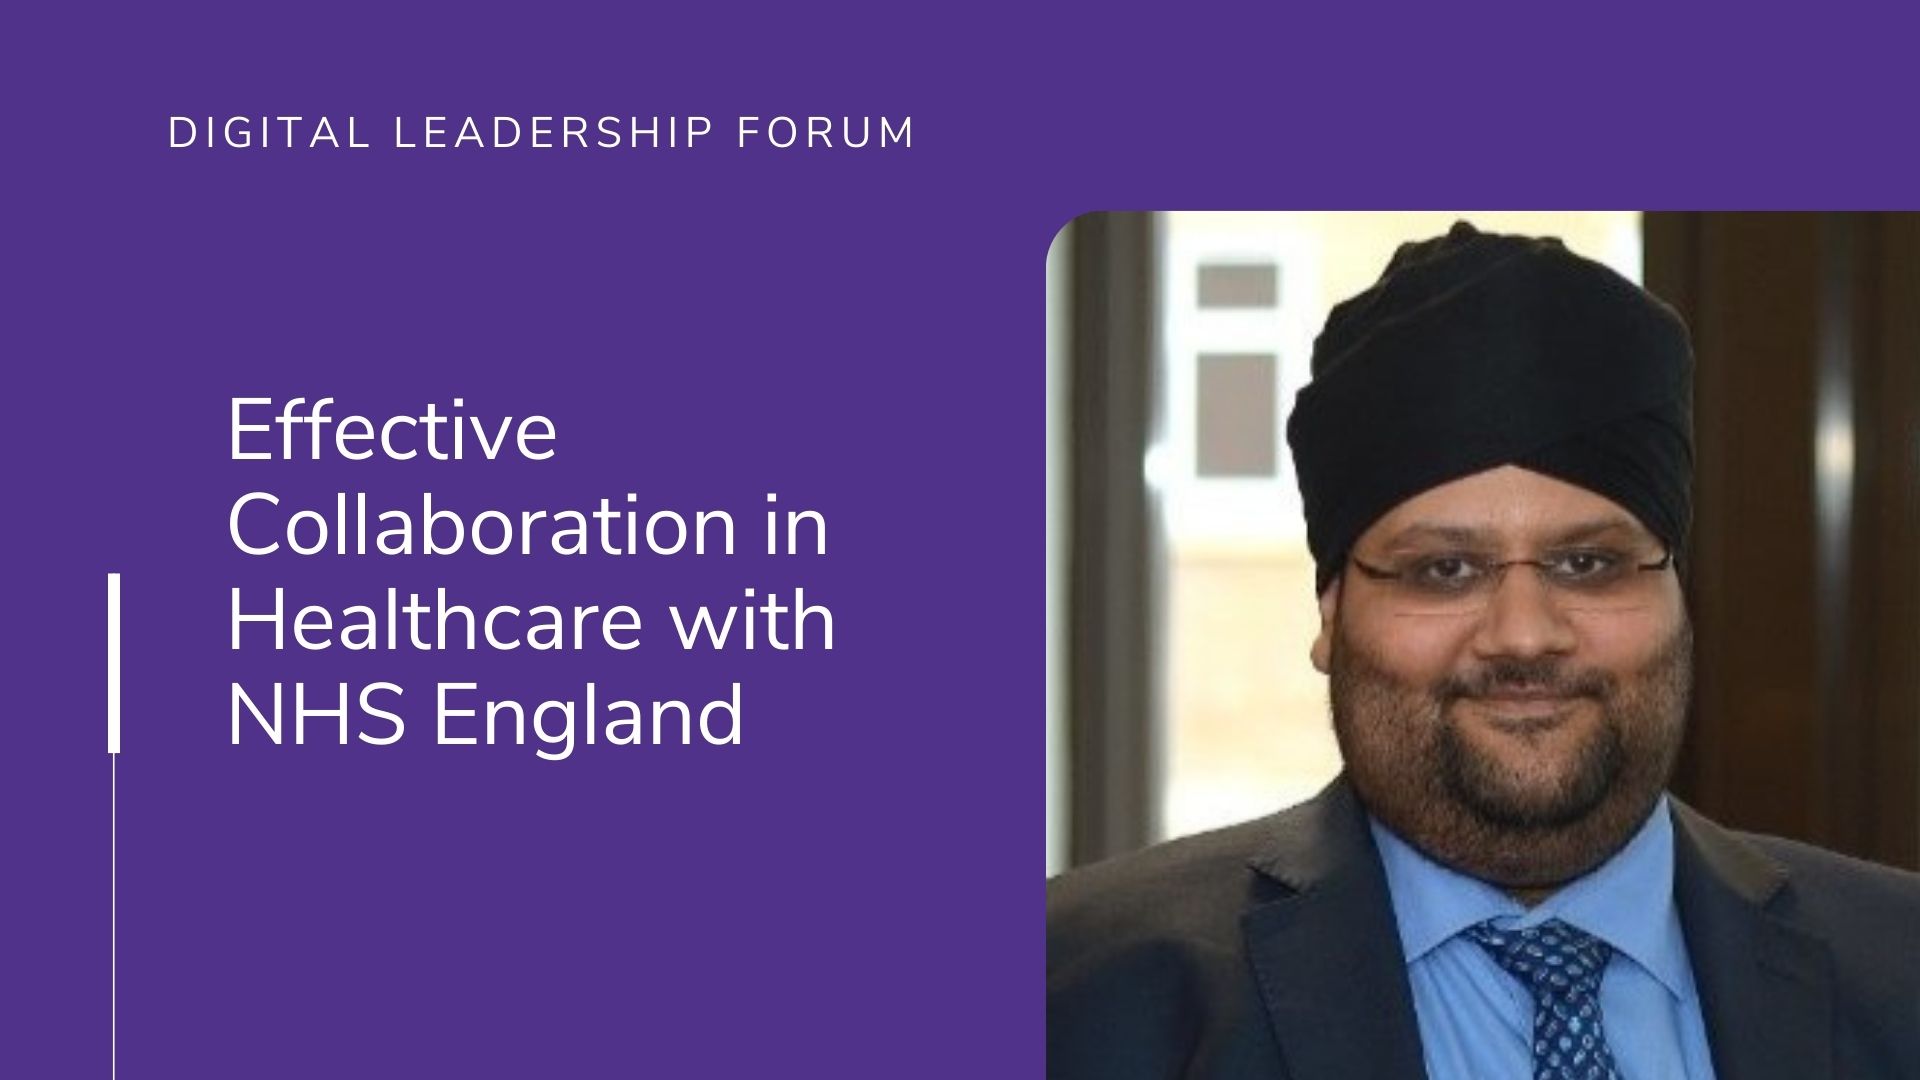 Video: Effective Collaboration in Healthcare with NHS England